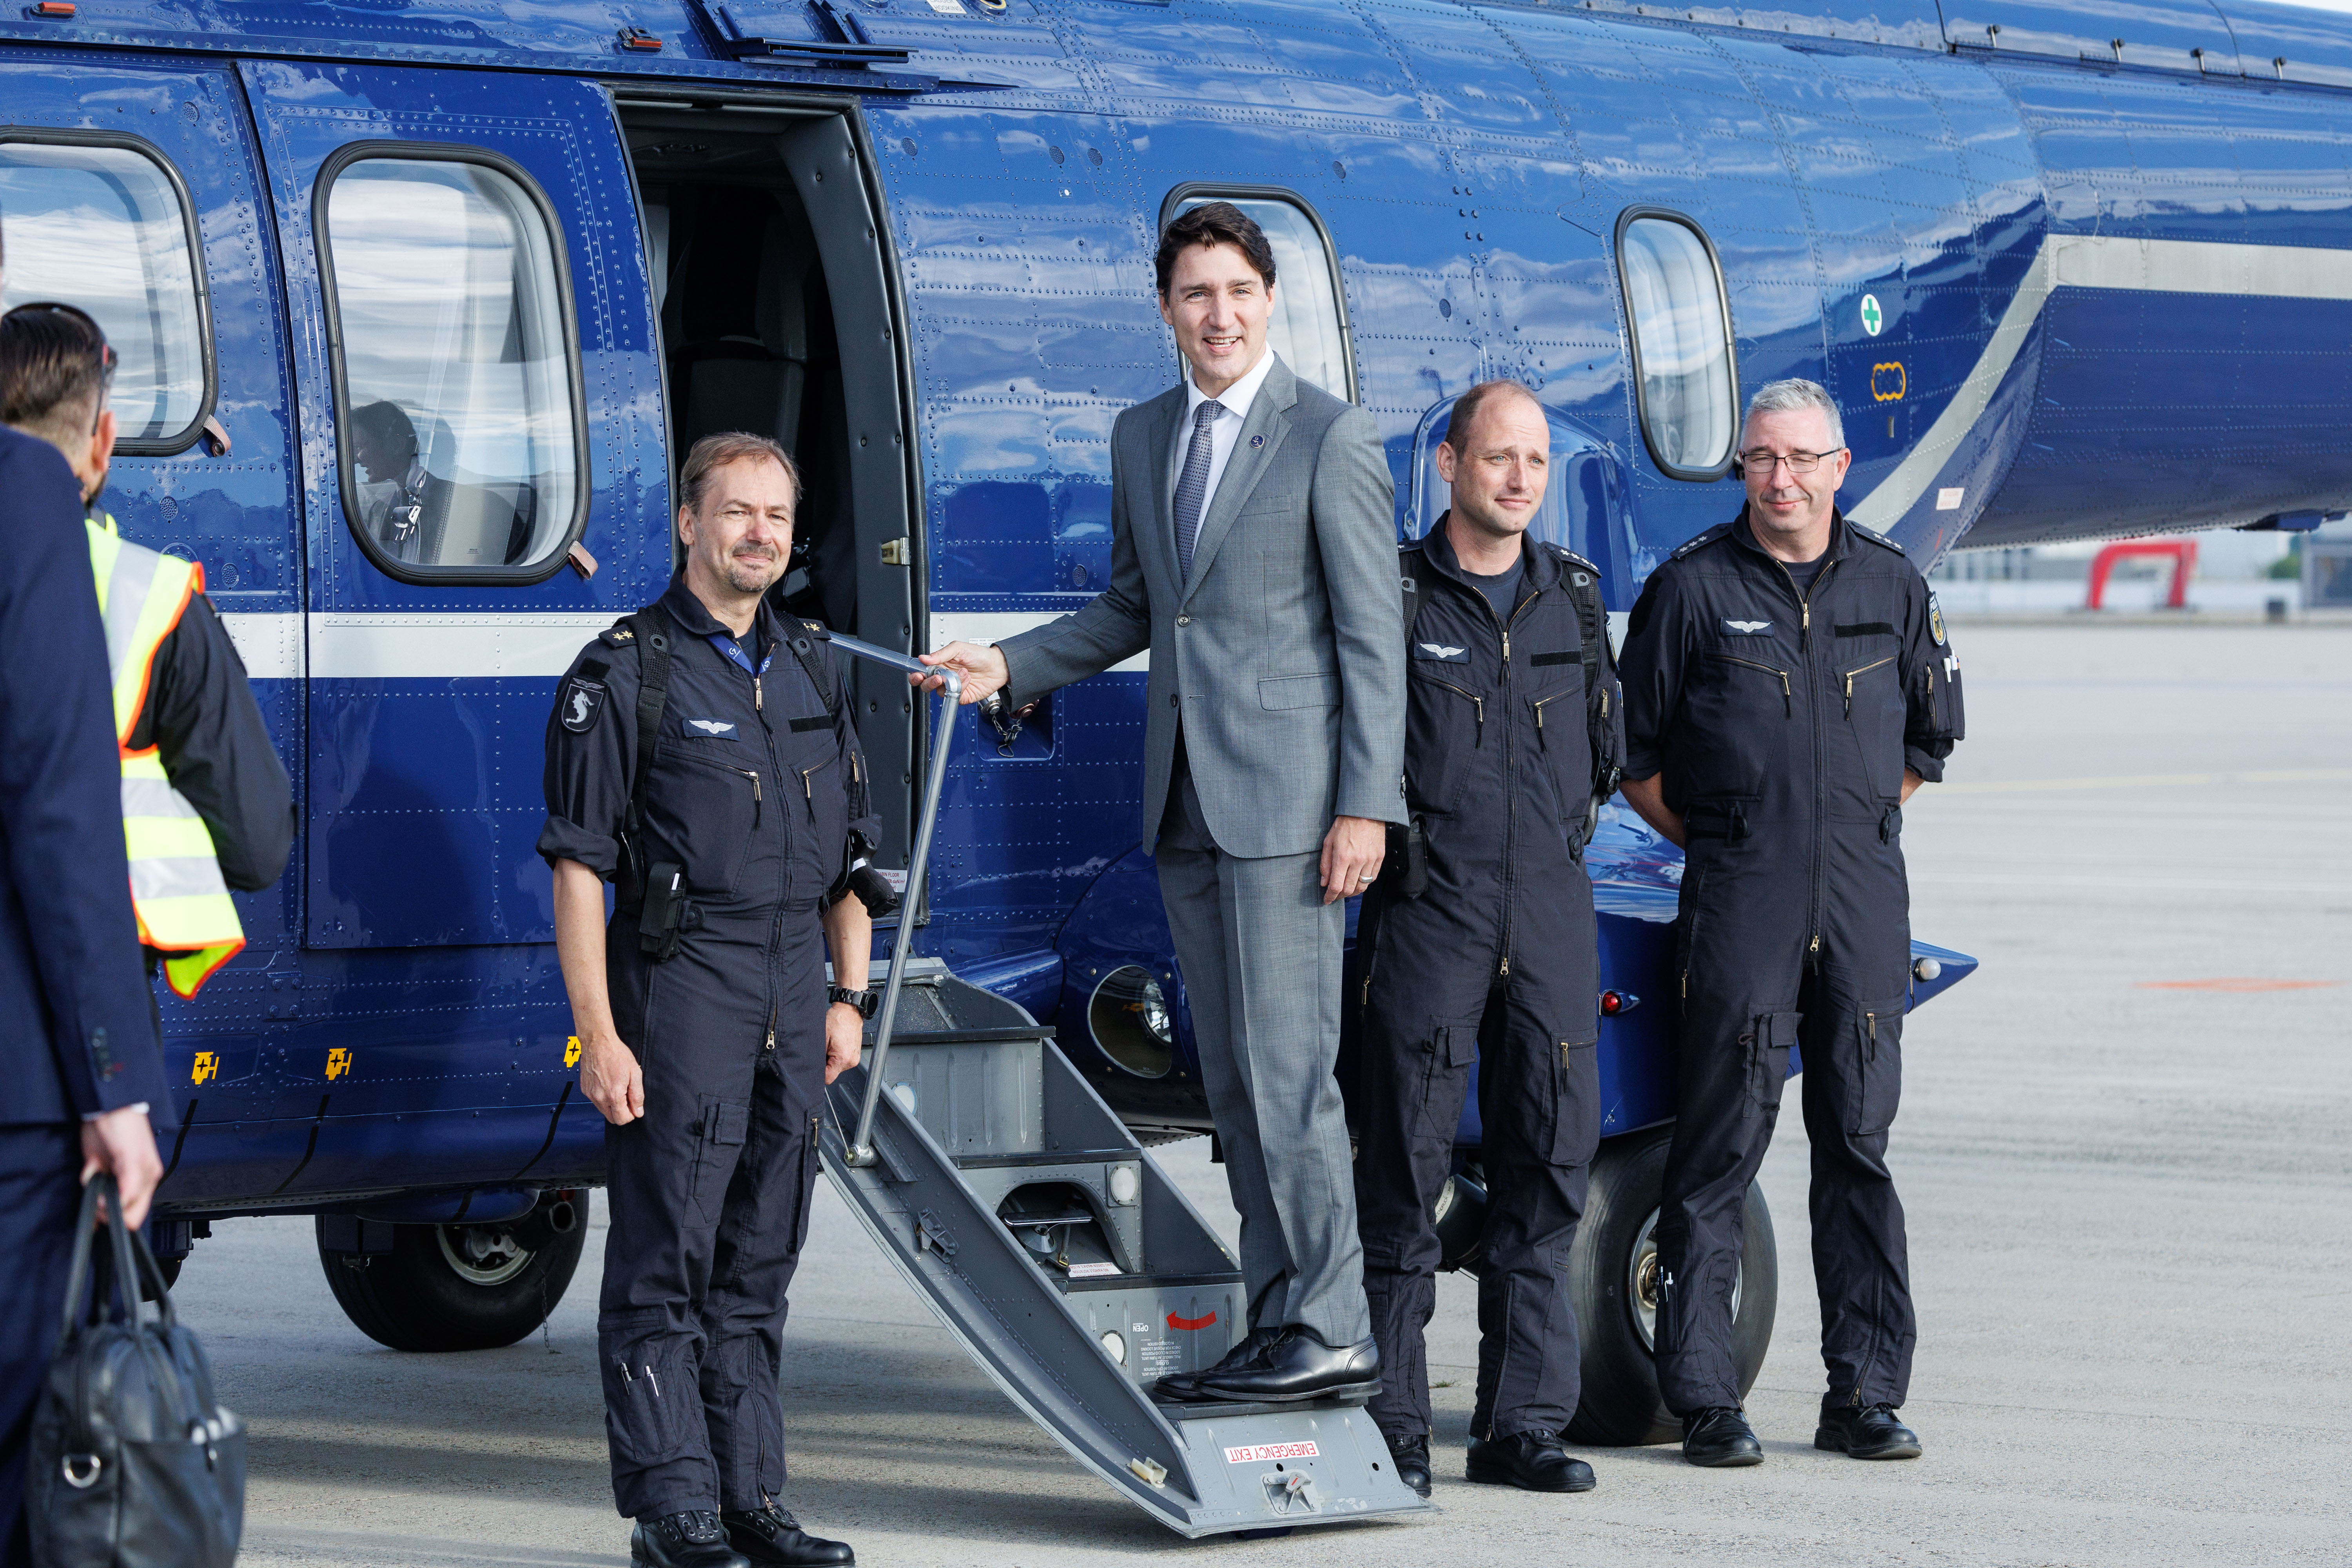 Justin Trudeau (Prime Minister of Canada) boarding a Federal Police helicopter that will take him to Schloss Elmau.